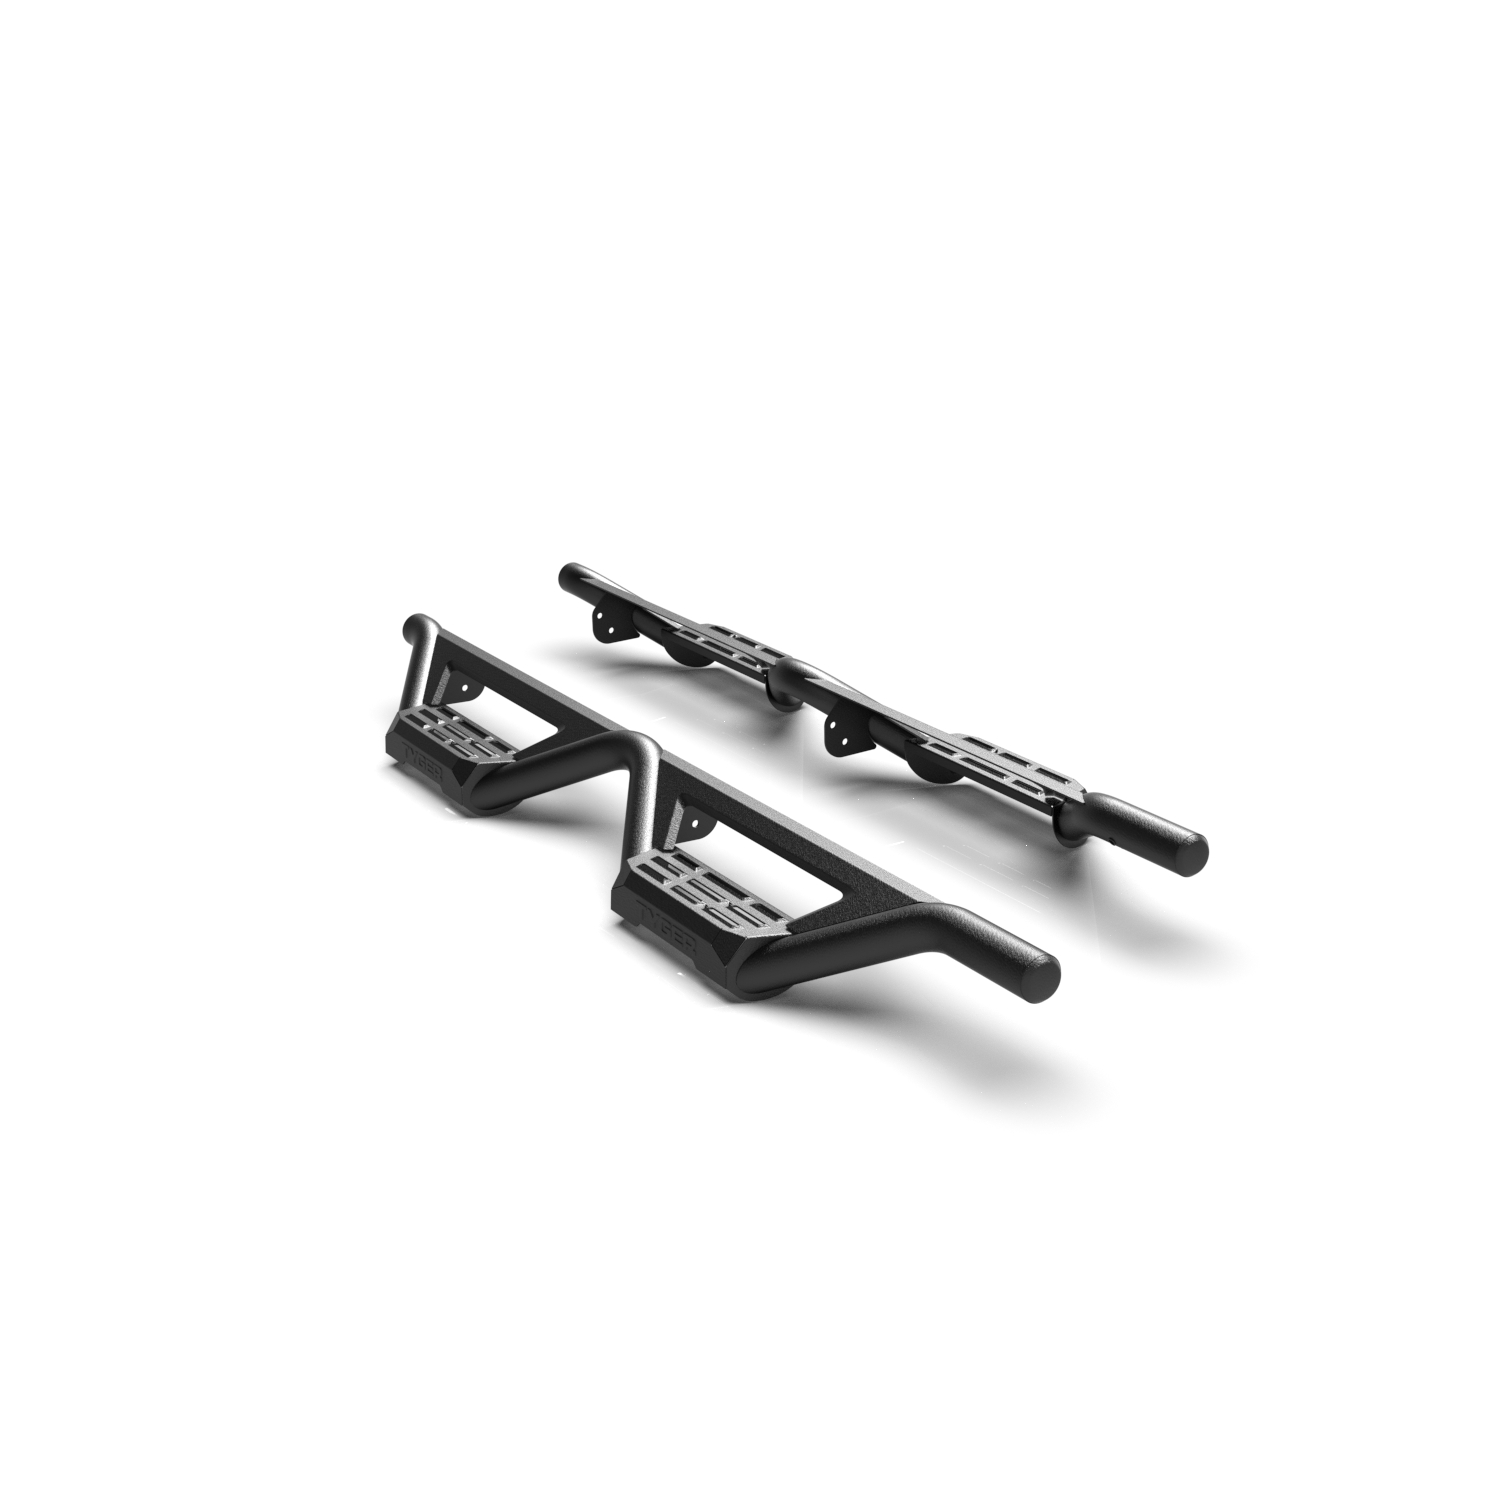 Tyger Auto Lander Running Board Compatible with 2007-2018 Jeep